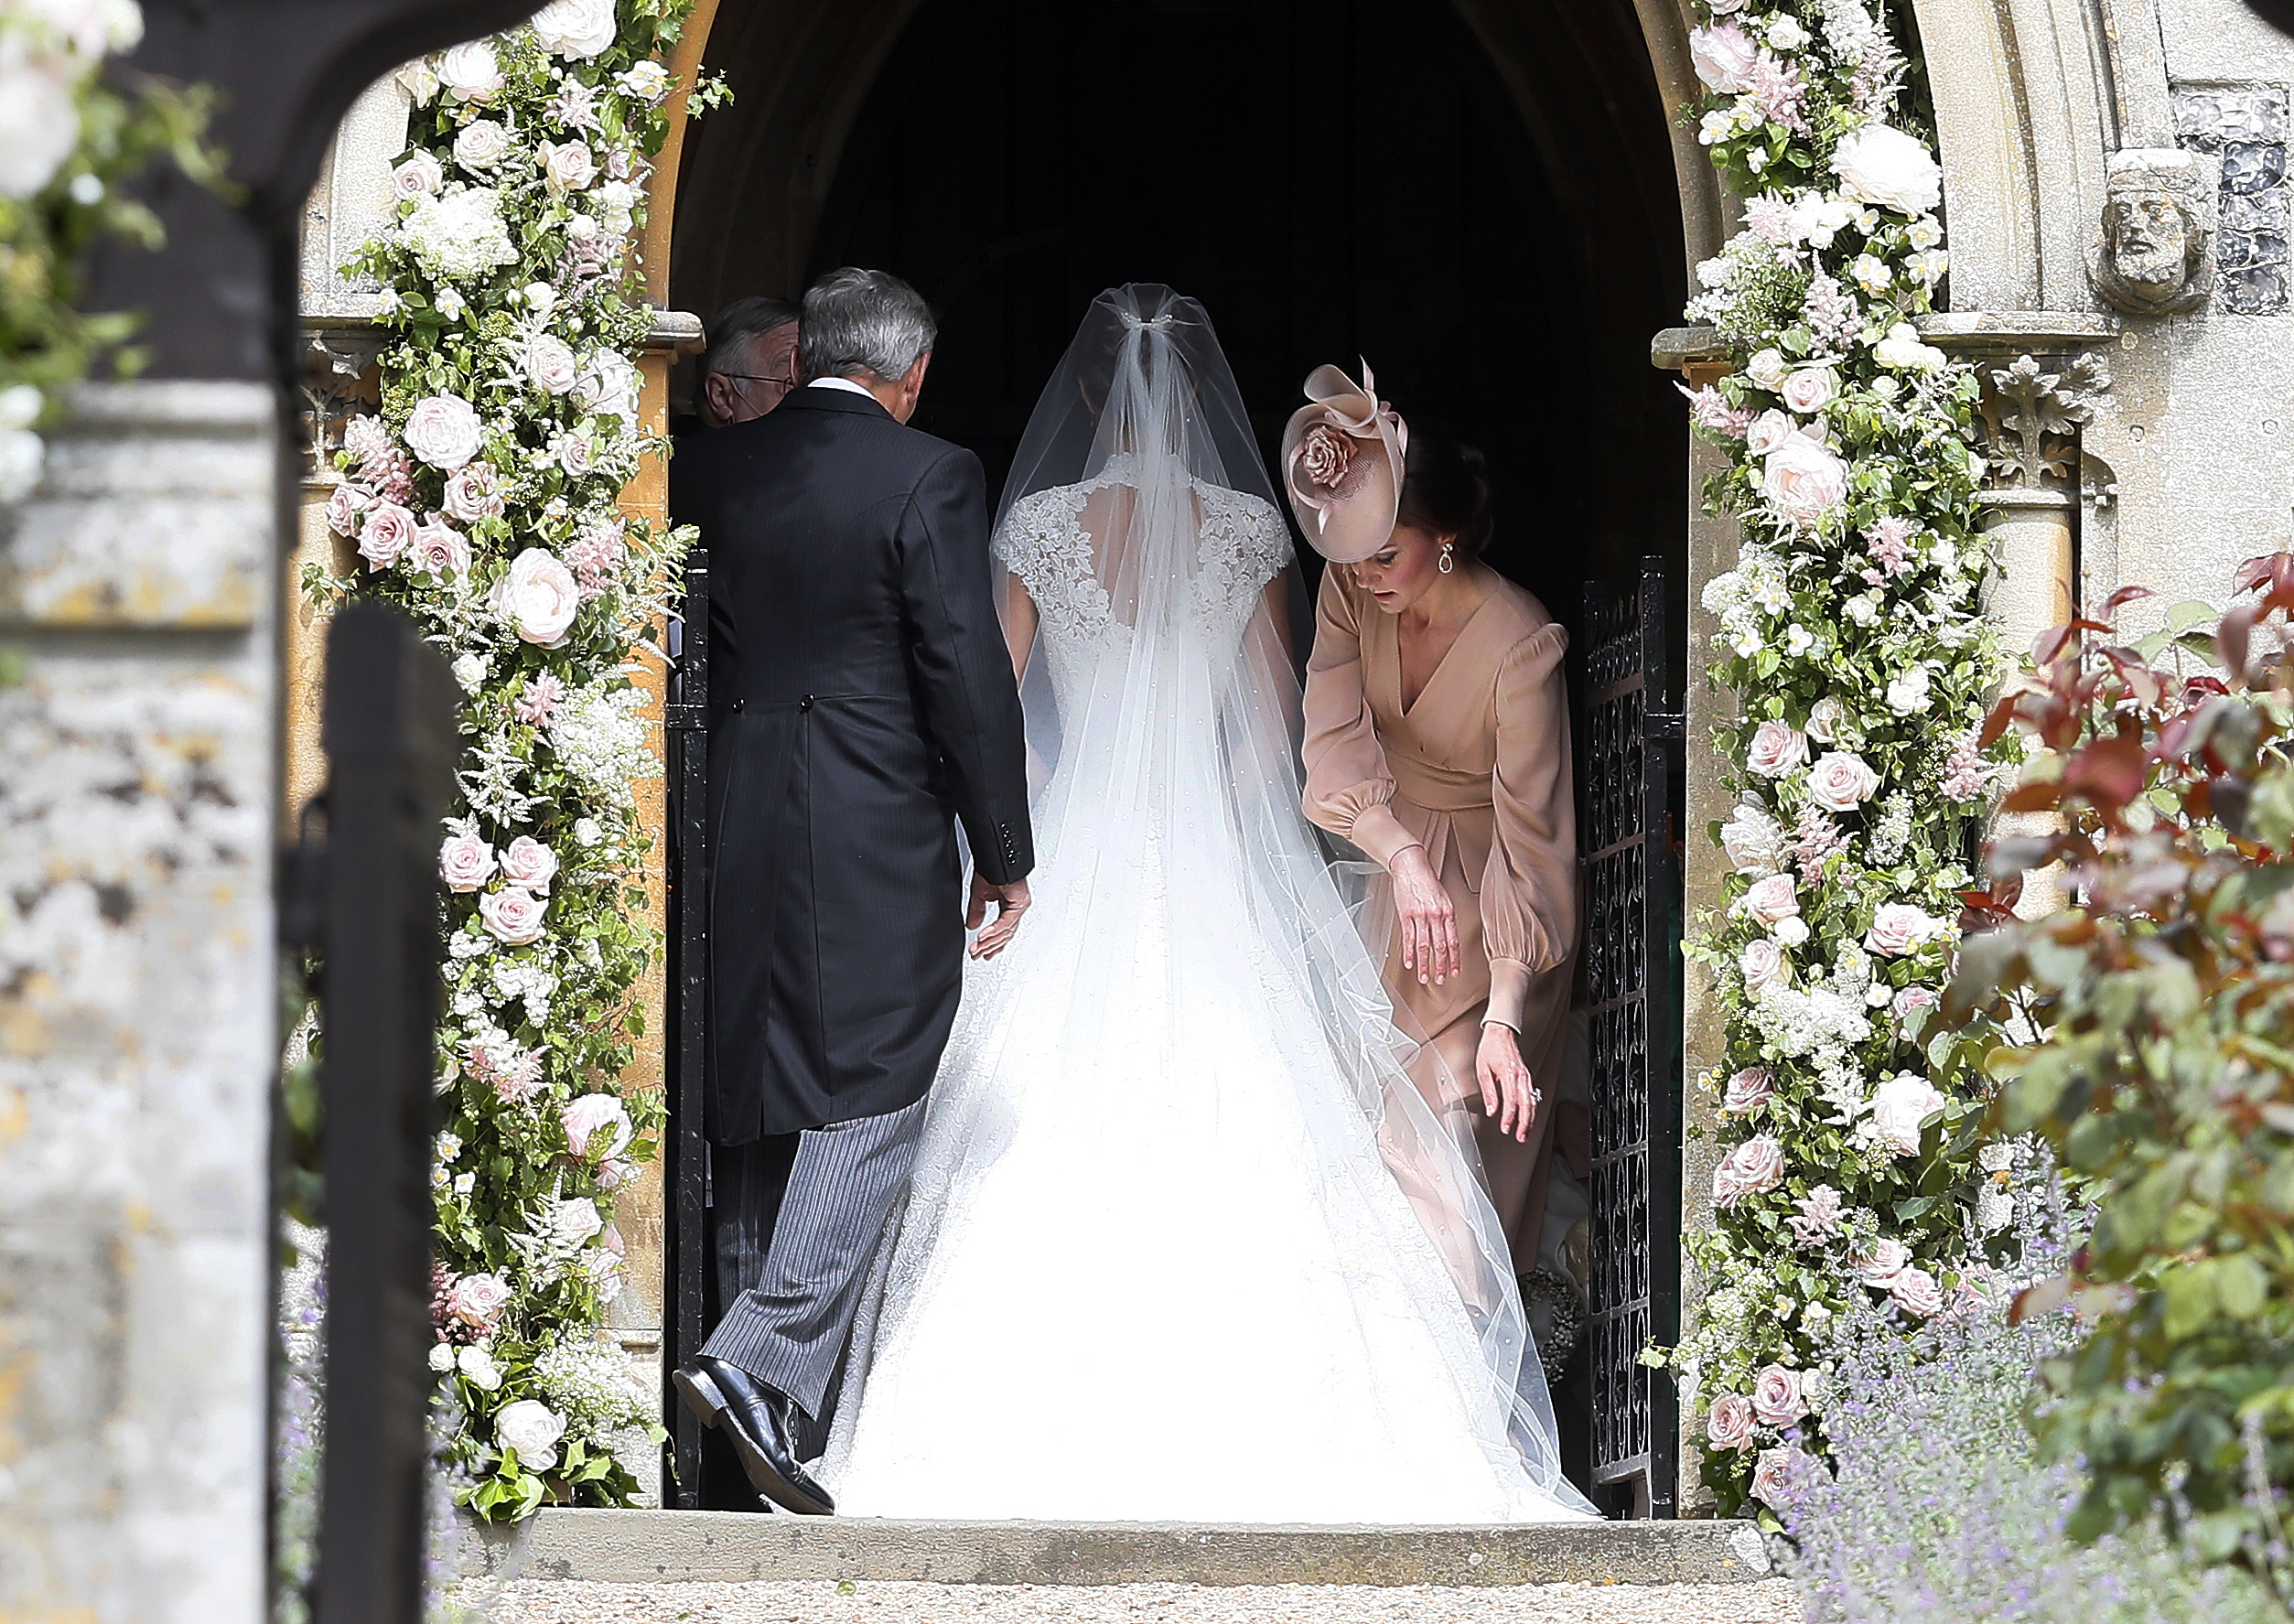 PHOTO: Kate, Duchess of Cambridge, arranges the train of her sister Pippa Middleton as she arrives with her father Michael Middleton for her wedding to James Matthews at St Mark's Church in Englefield, England, May 20, 2017.